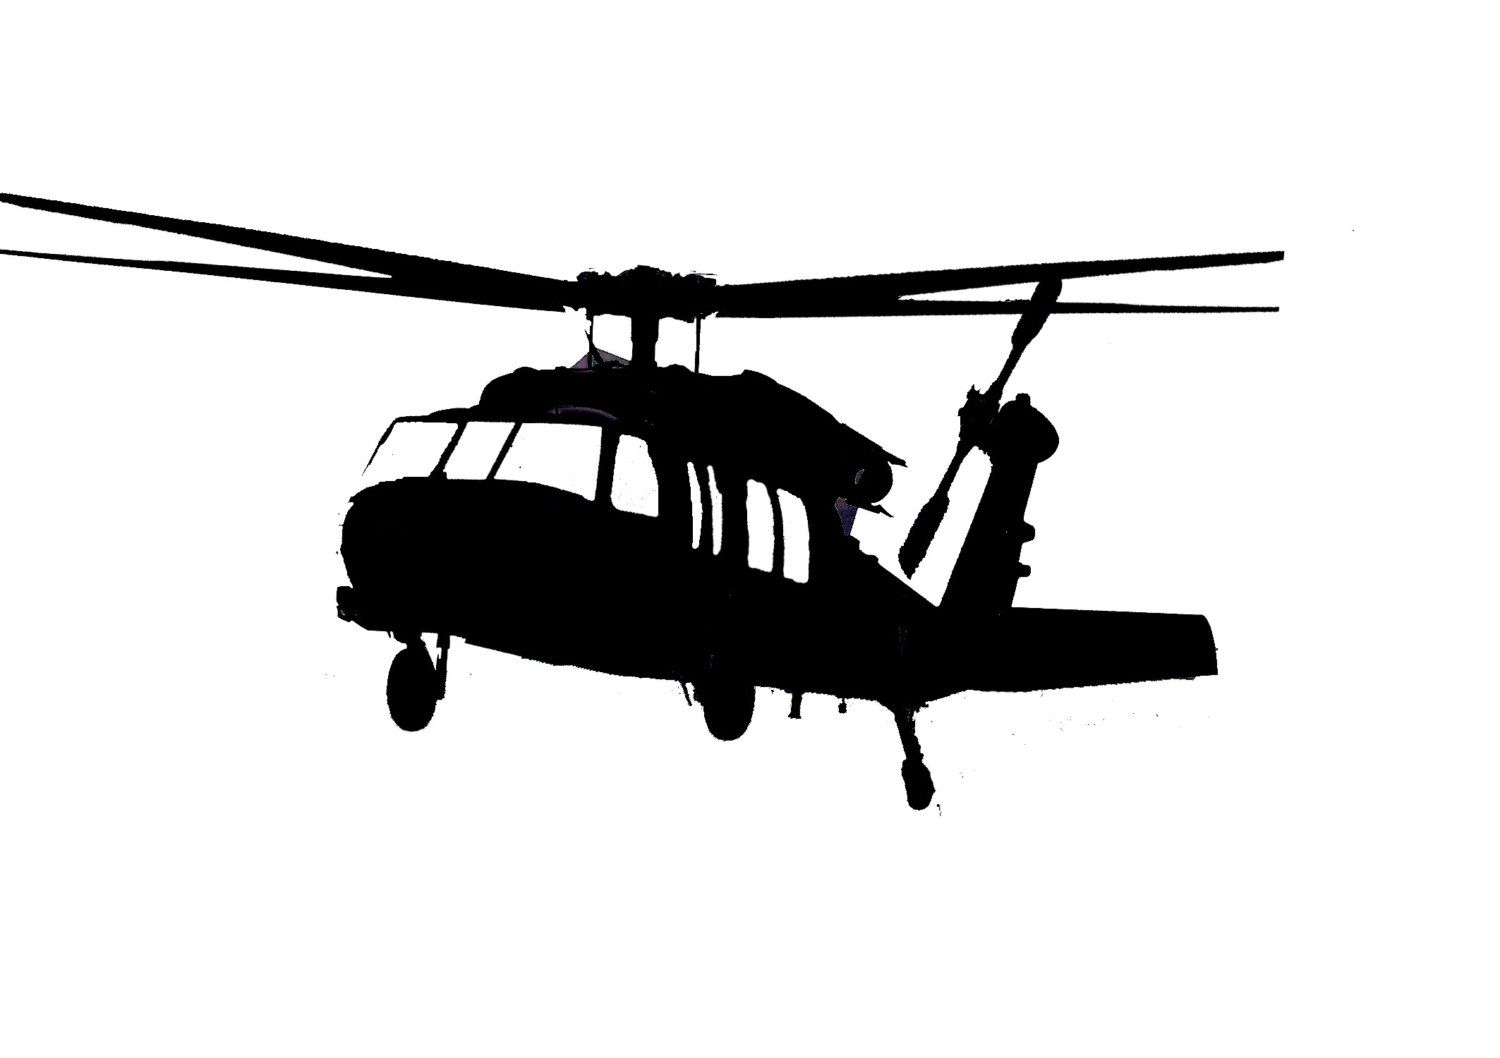 helicopter clipart black hawk helicopter